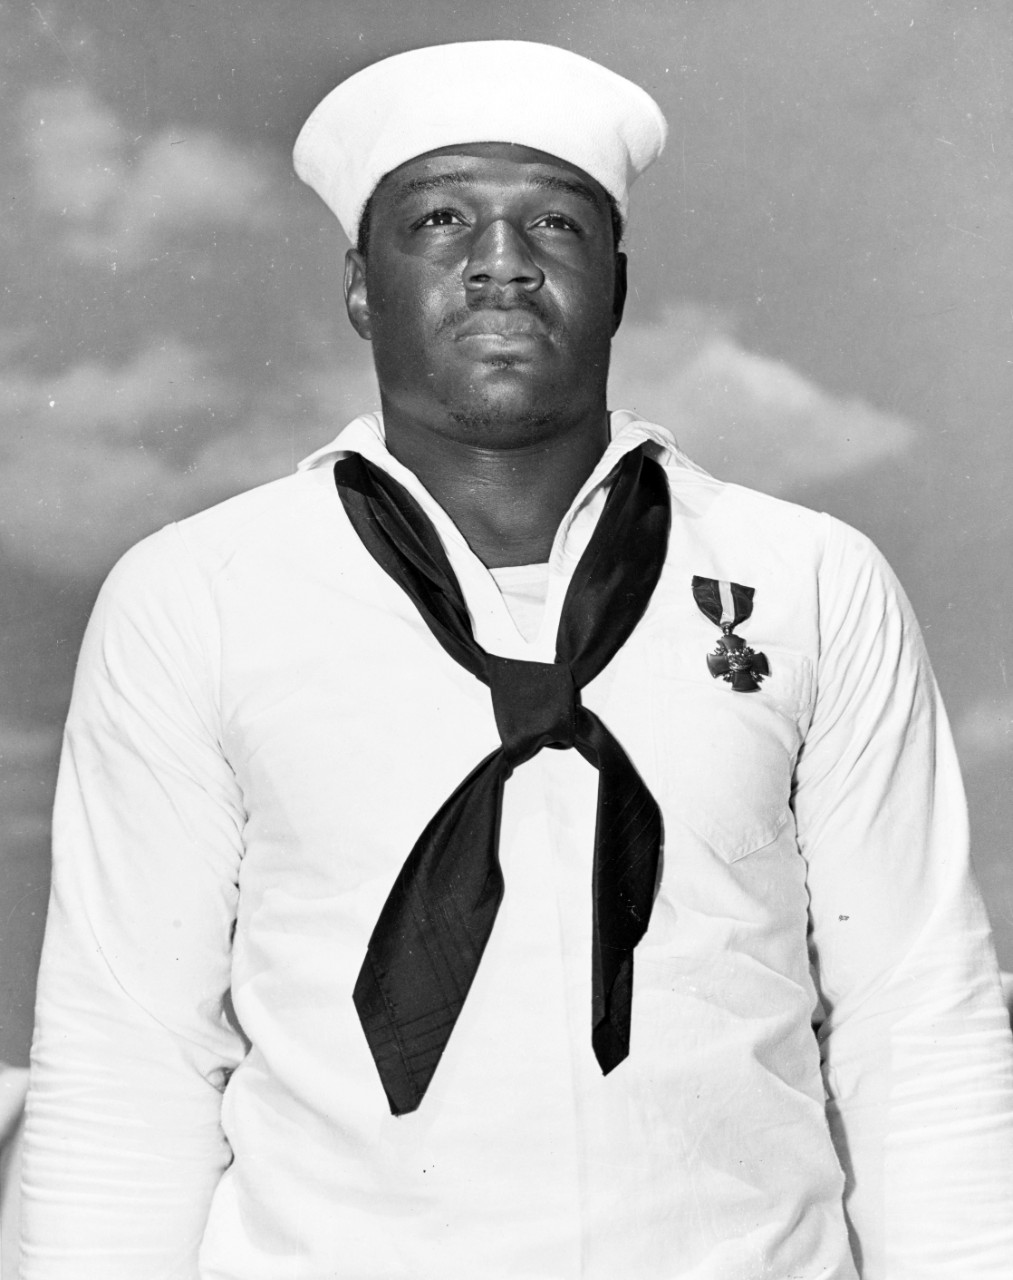 Mess Attendant Second Class Doris Miller just after being presented with the Navy Cross by Admiral Chester W. Nimitz on board the aircraft carrier Enterprise (CV-6) at Pearl Harbor, 27 May 1942. Official U.S. Navy Photograph, now in the collectio...